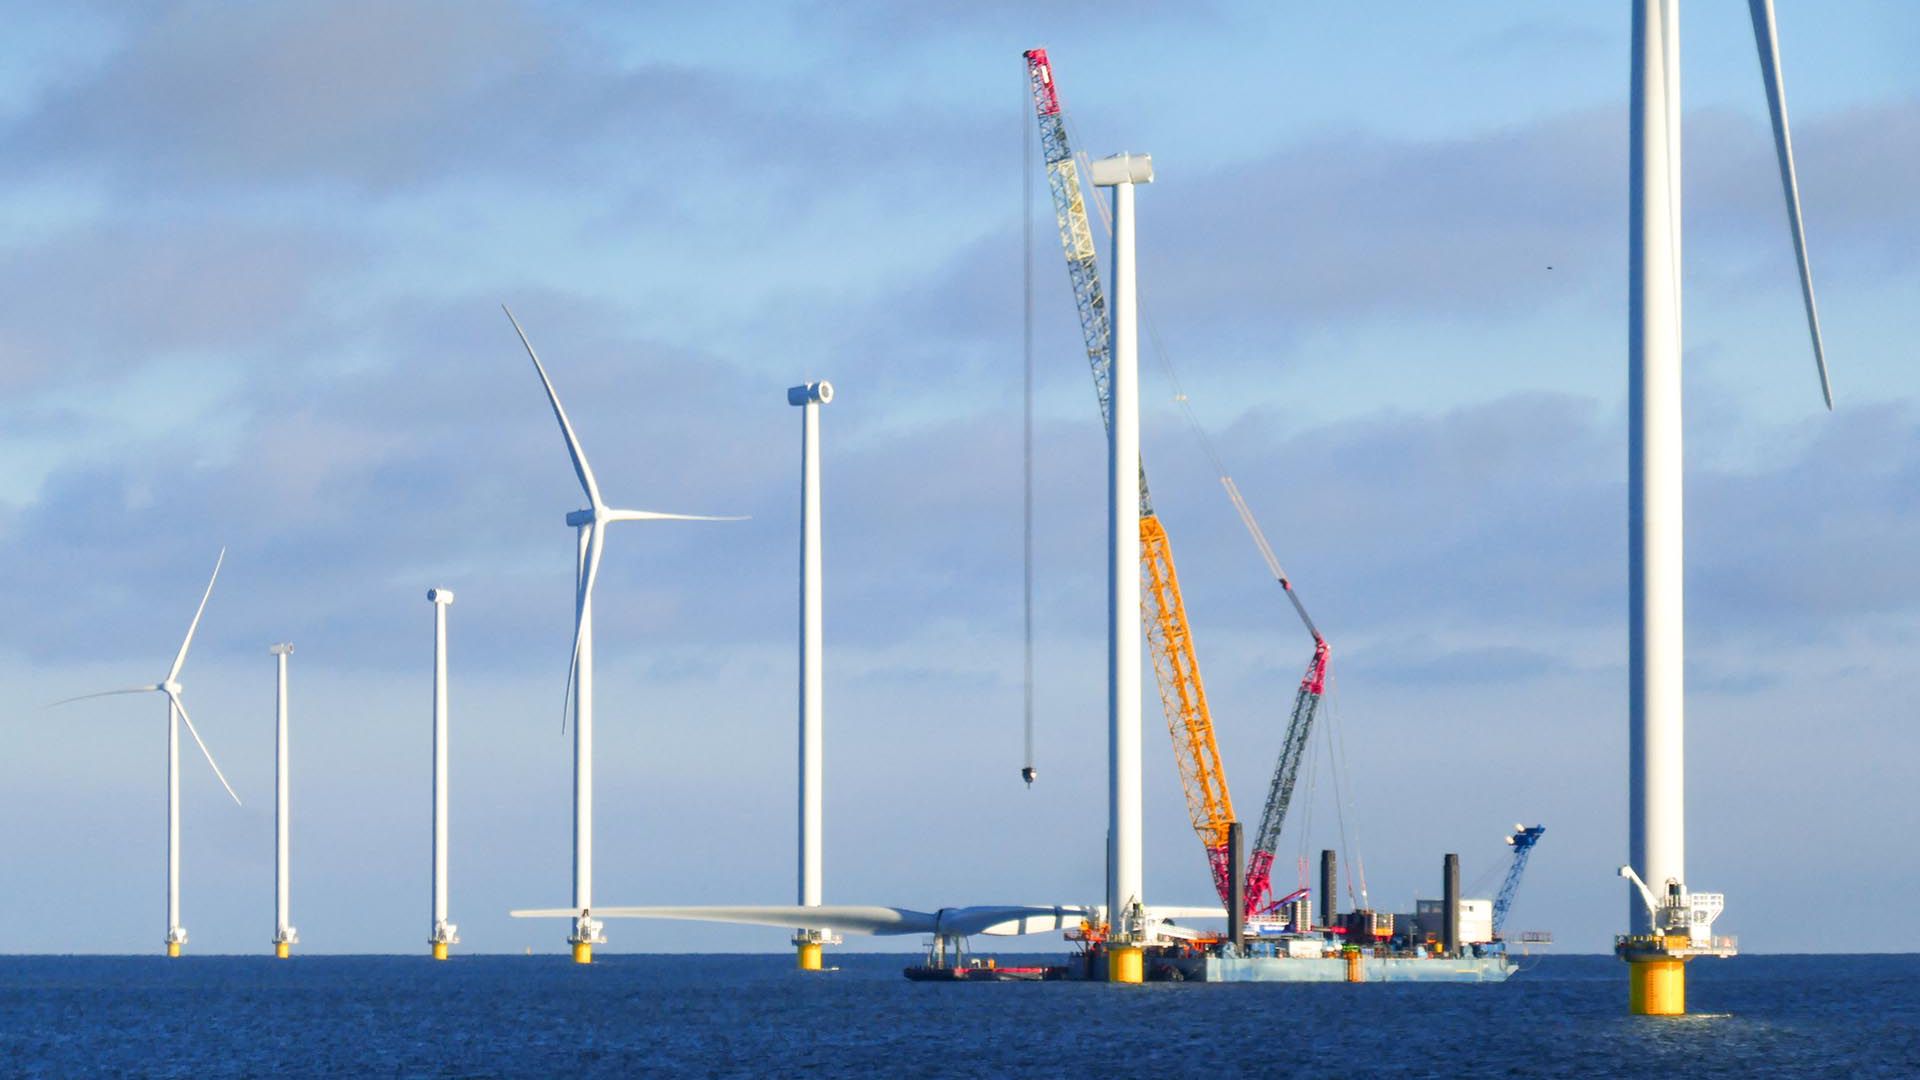 Construction of offshore wind farm - wind turbine in Netherland on the sea (markermeer). Crane ship is preparing for lifting up rotor of the wind turbine. Sunny weather and atmospheric mood.